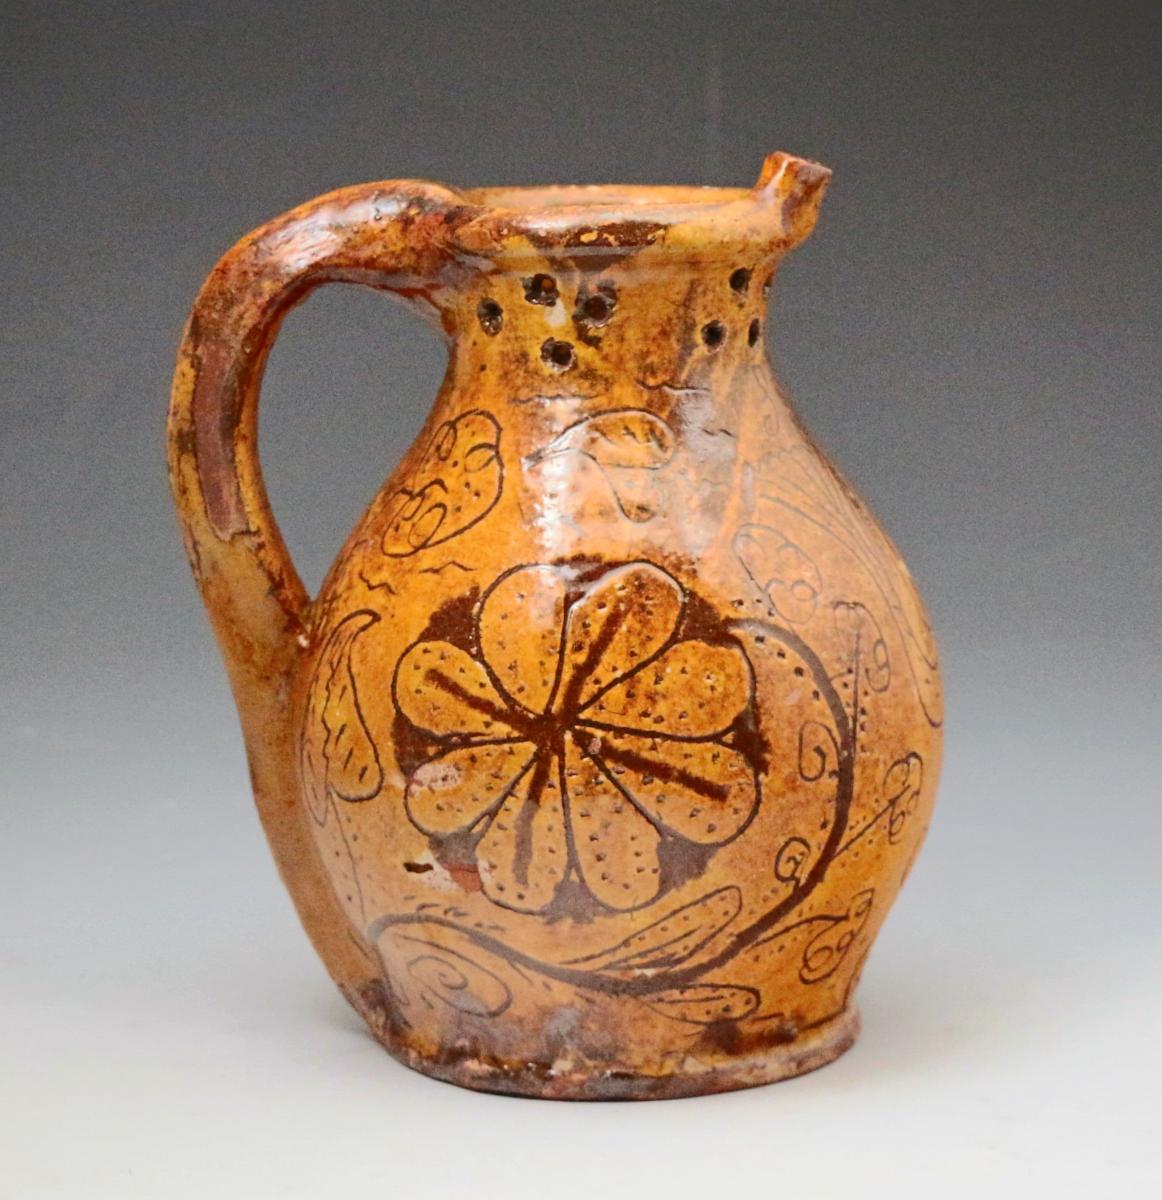 English pottery puzzle jug scraffito decorated and dated 1798 with initials SW